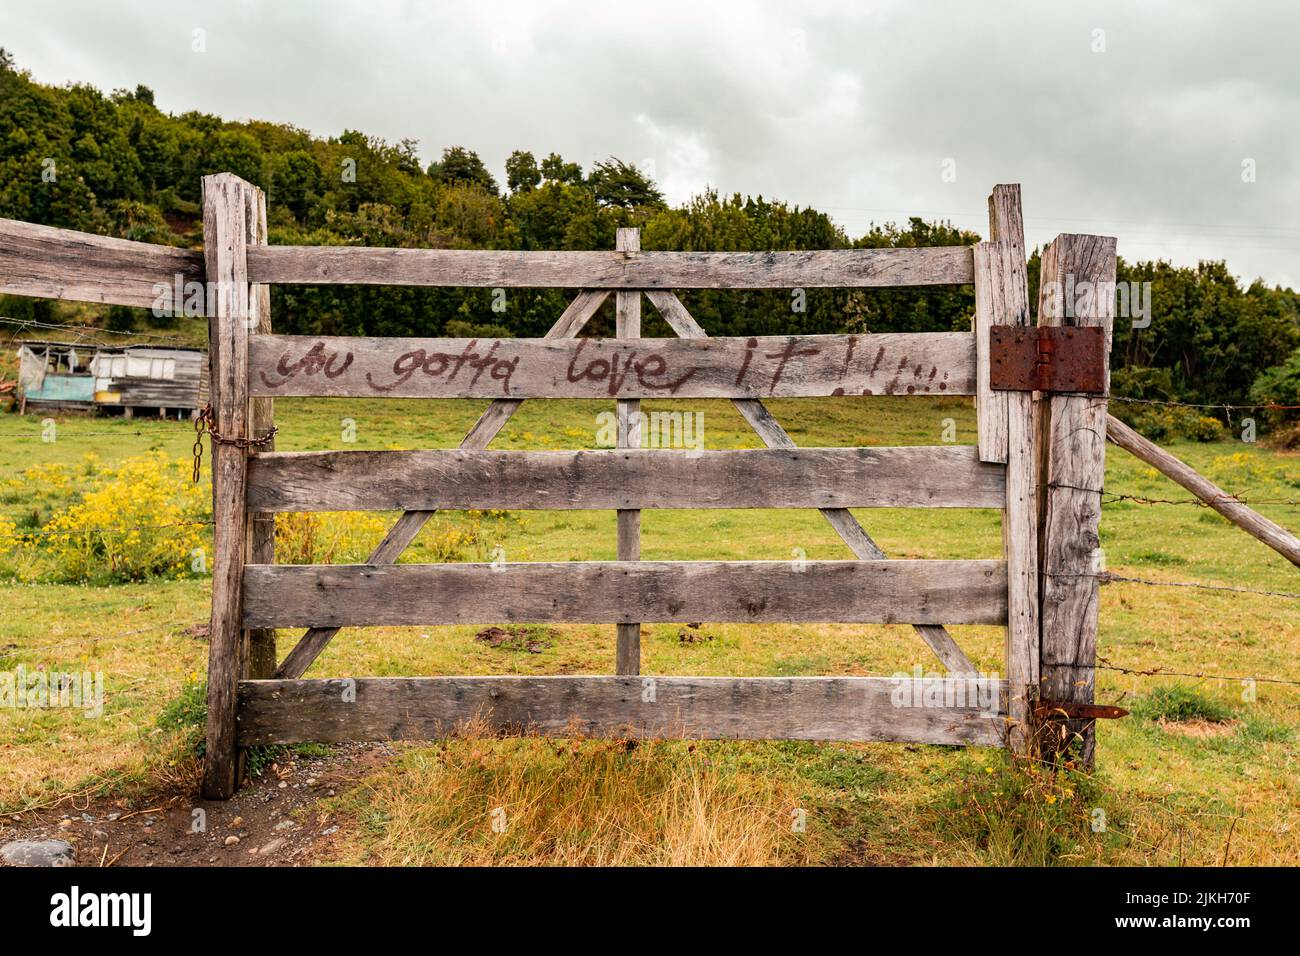 A closeup of a wooden fence with 'you gotta love it!!!' inscription in Valdivia, Chile Stock Photo